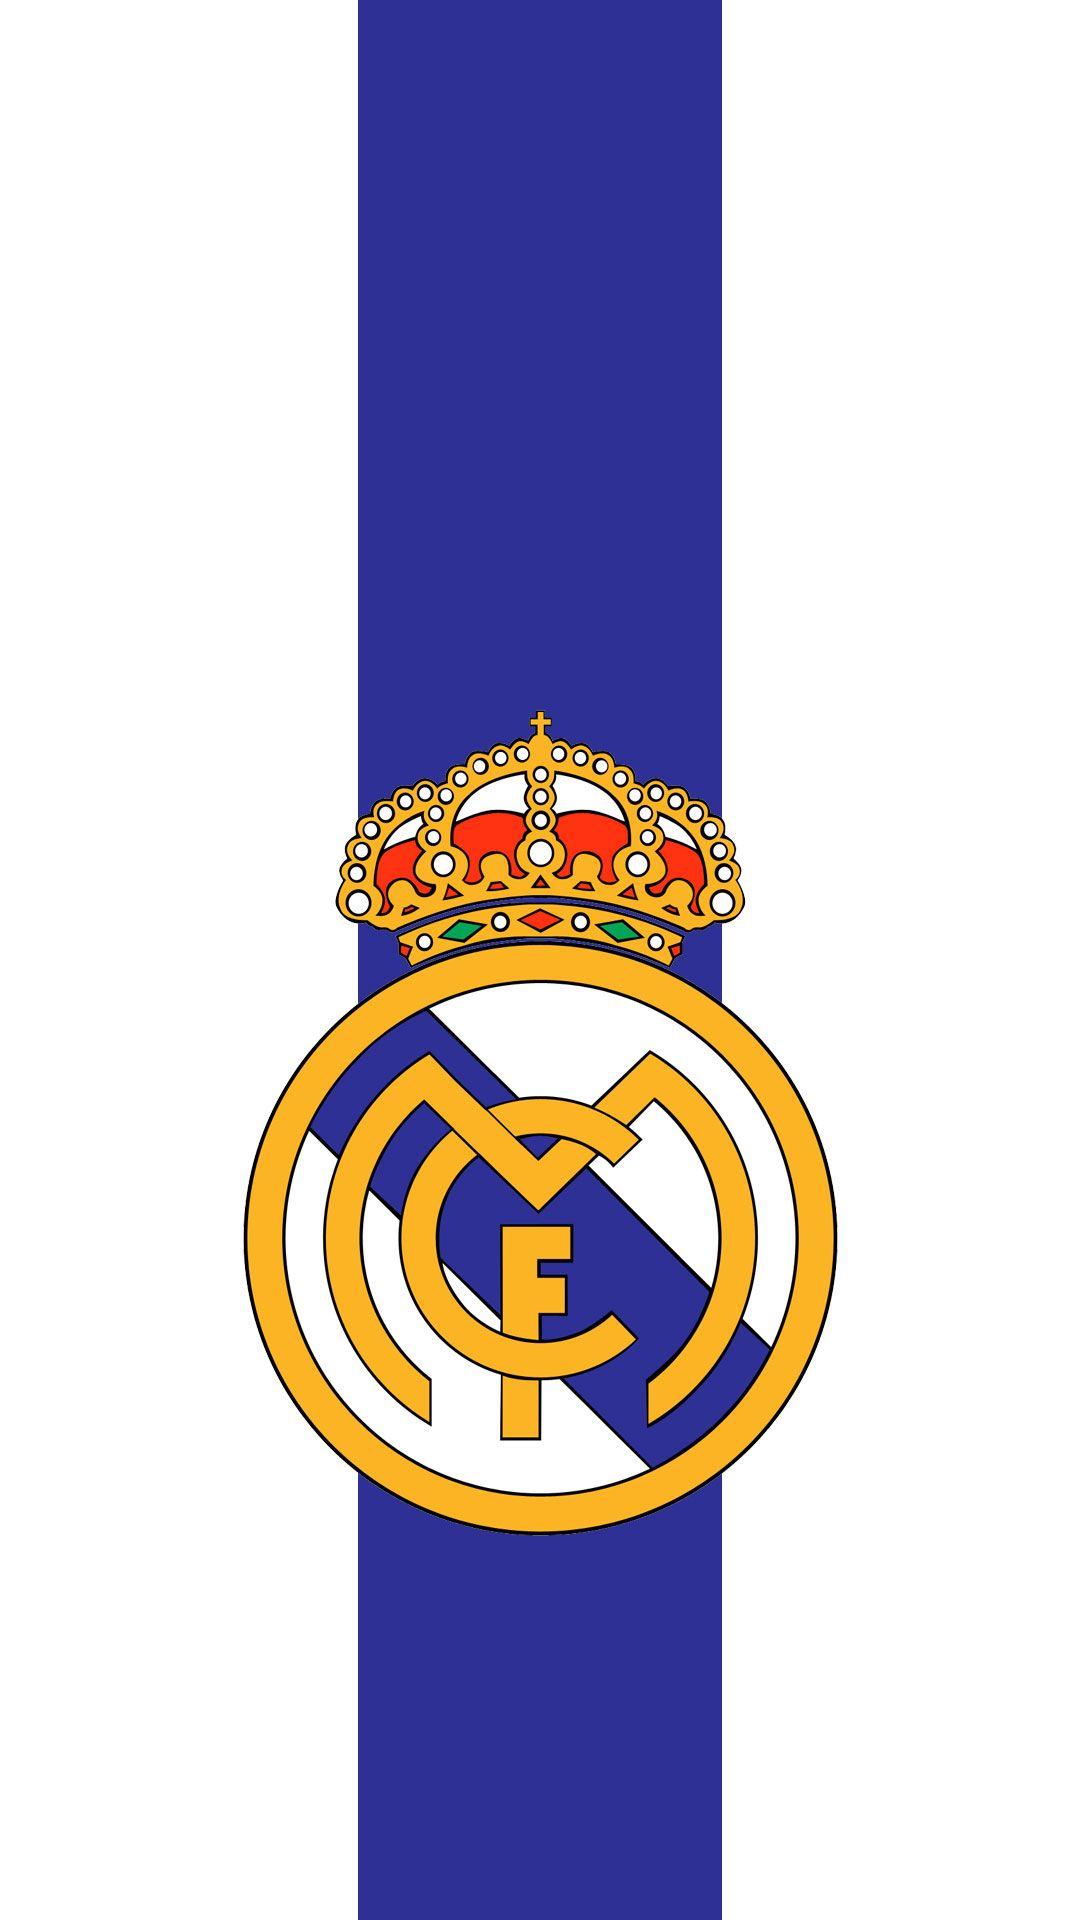 Real Madrid for Android. Real madrid wallpaper, Real